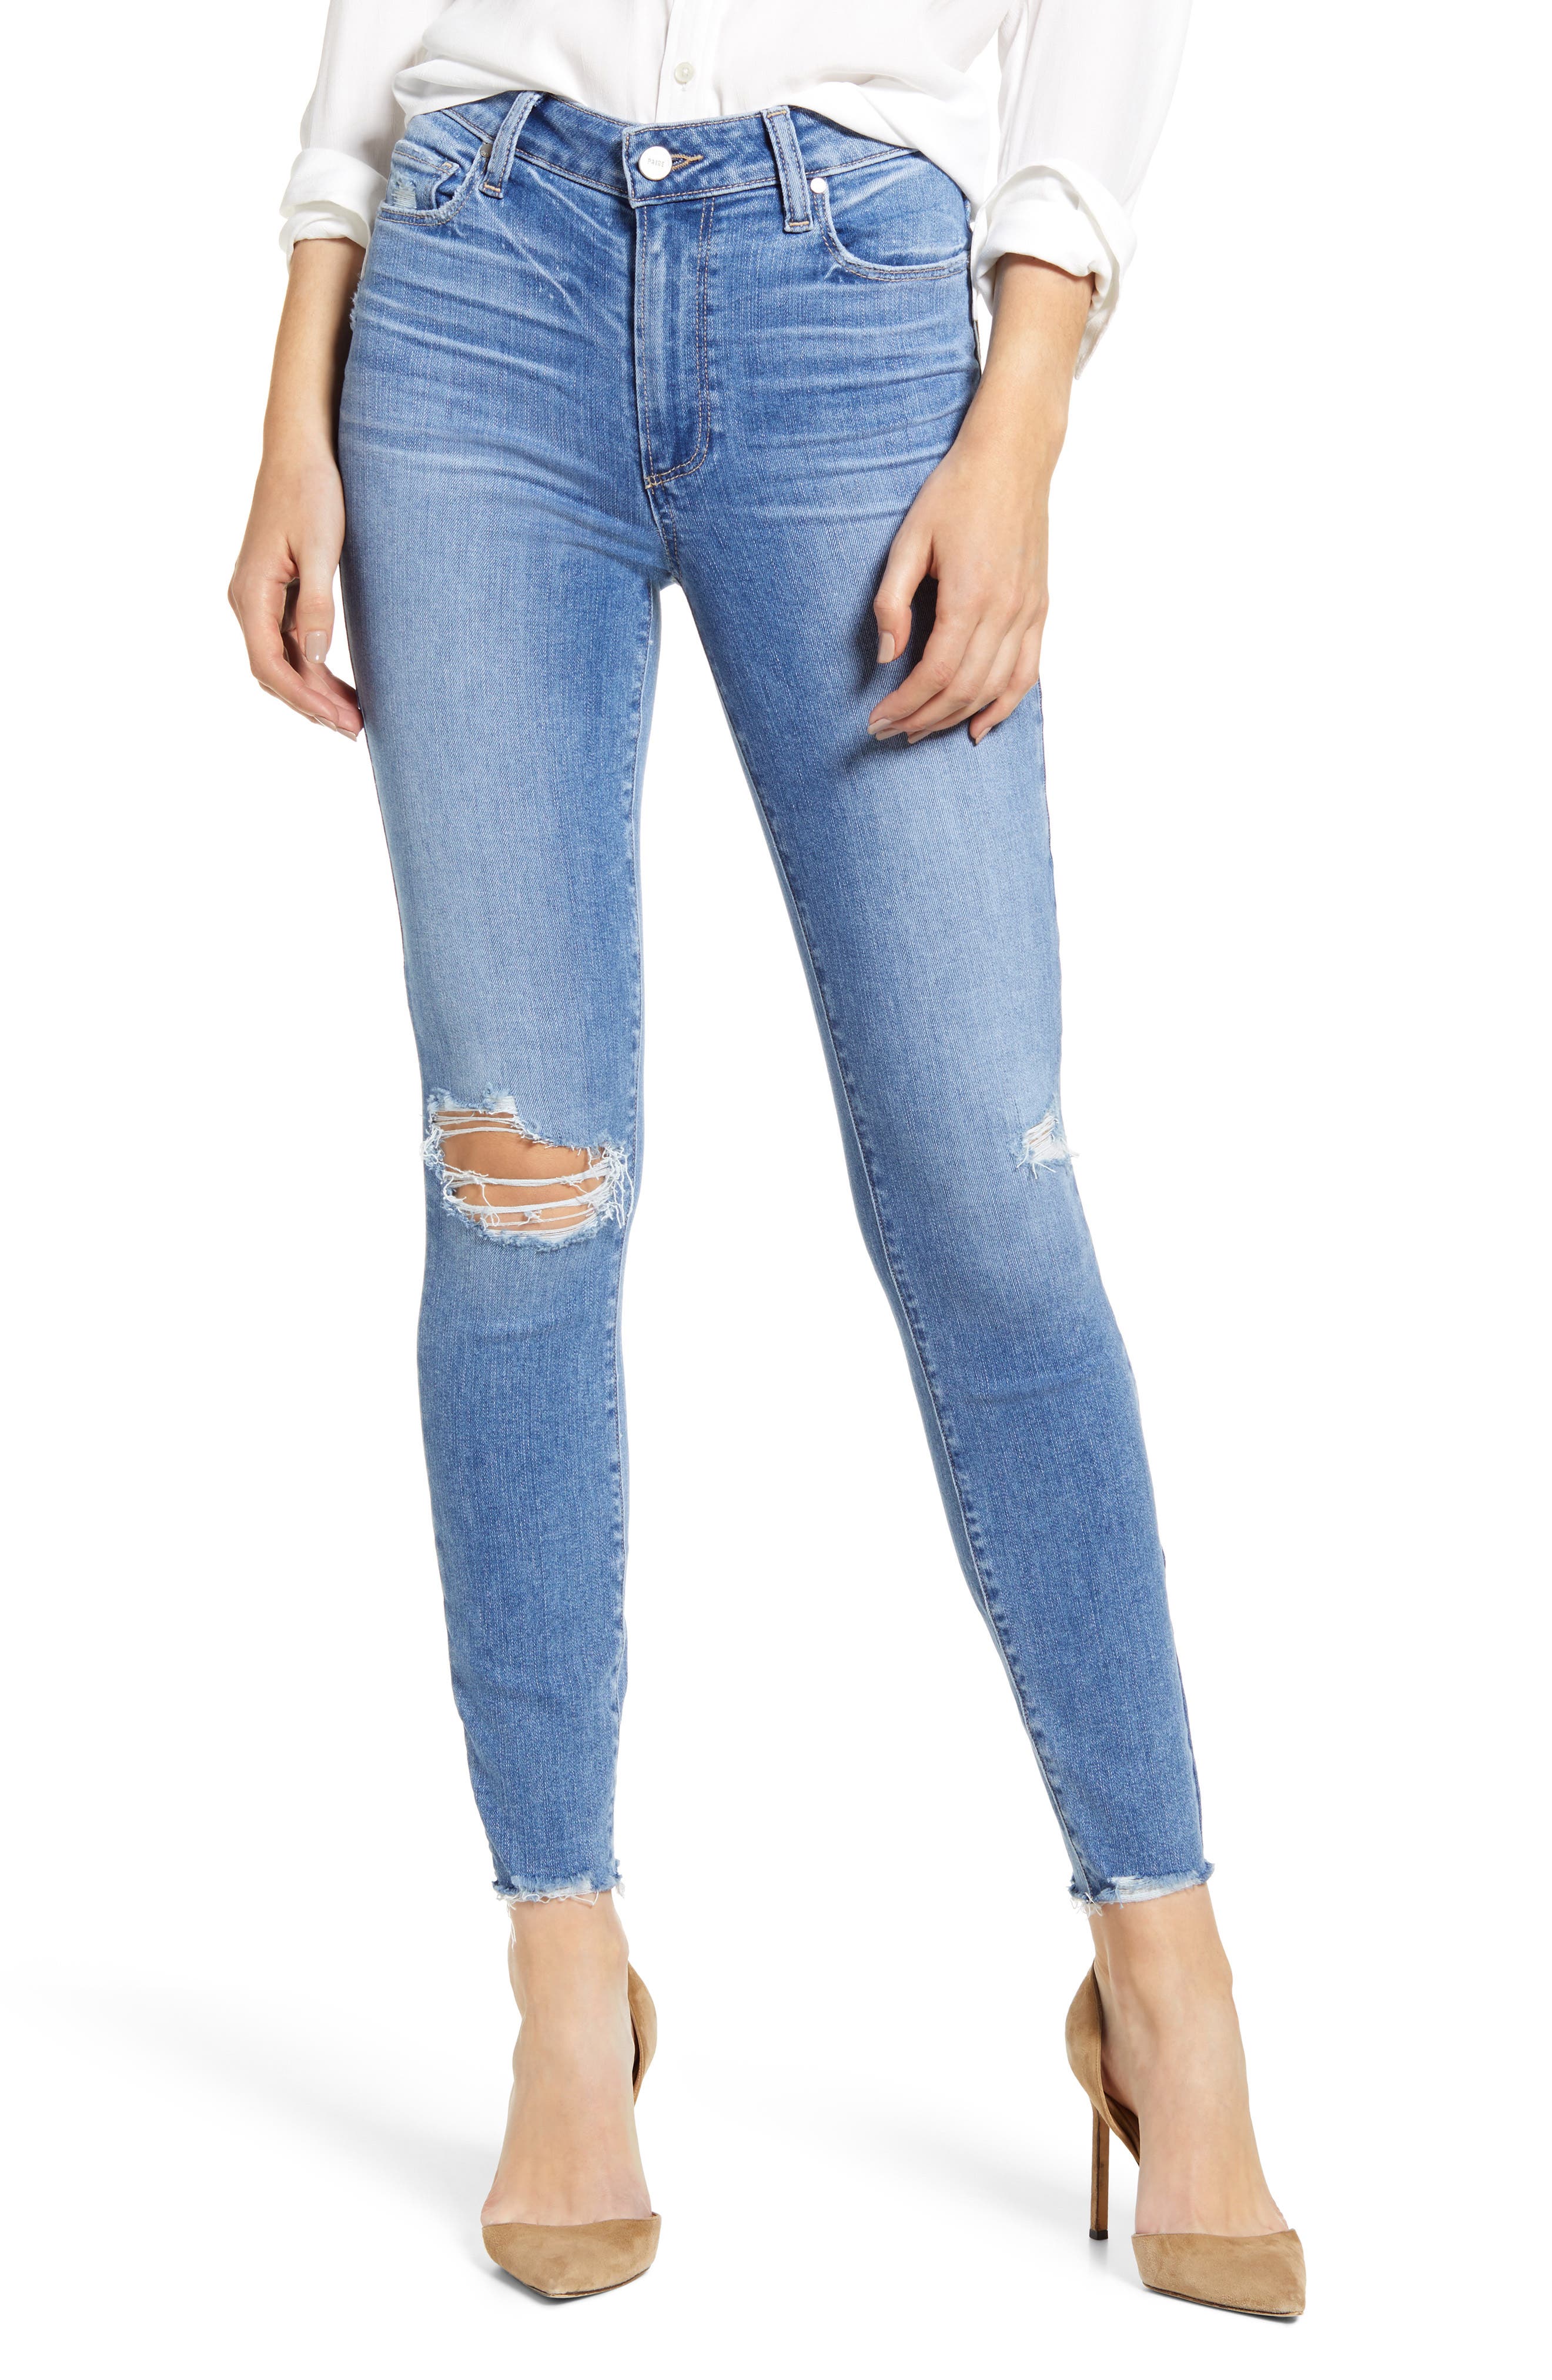 distressed jeans at ankle